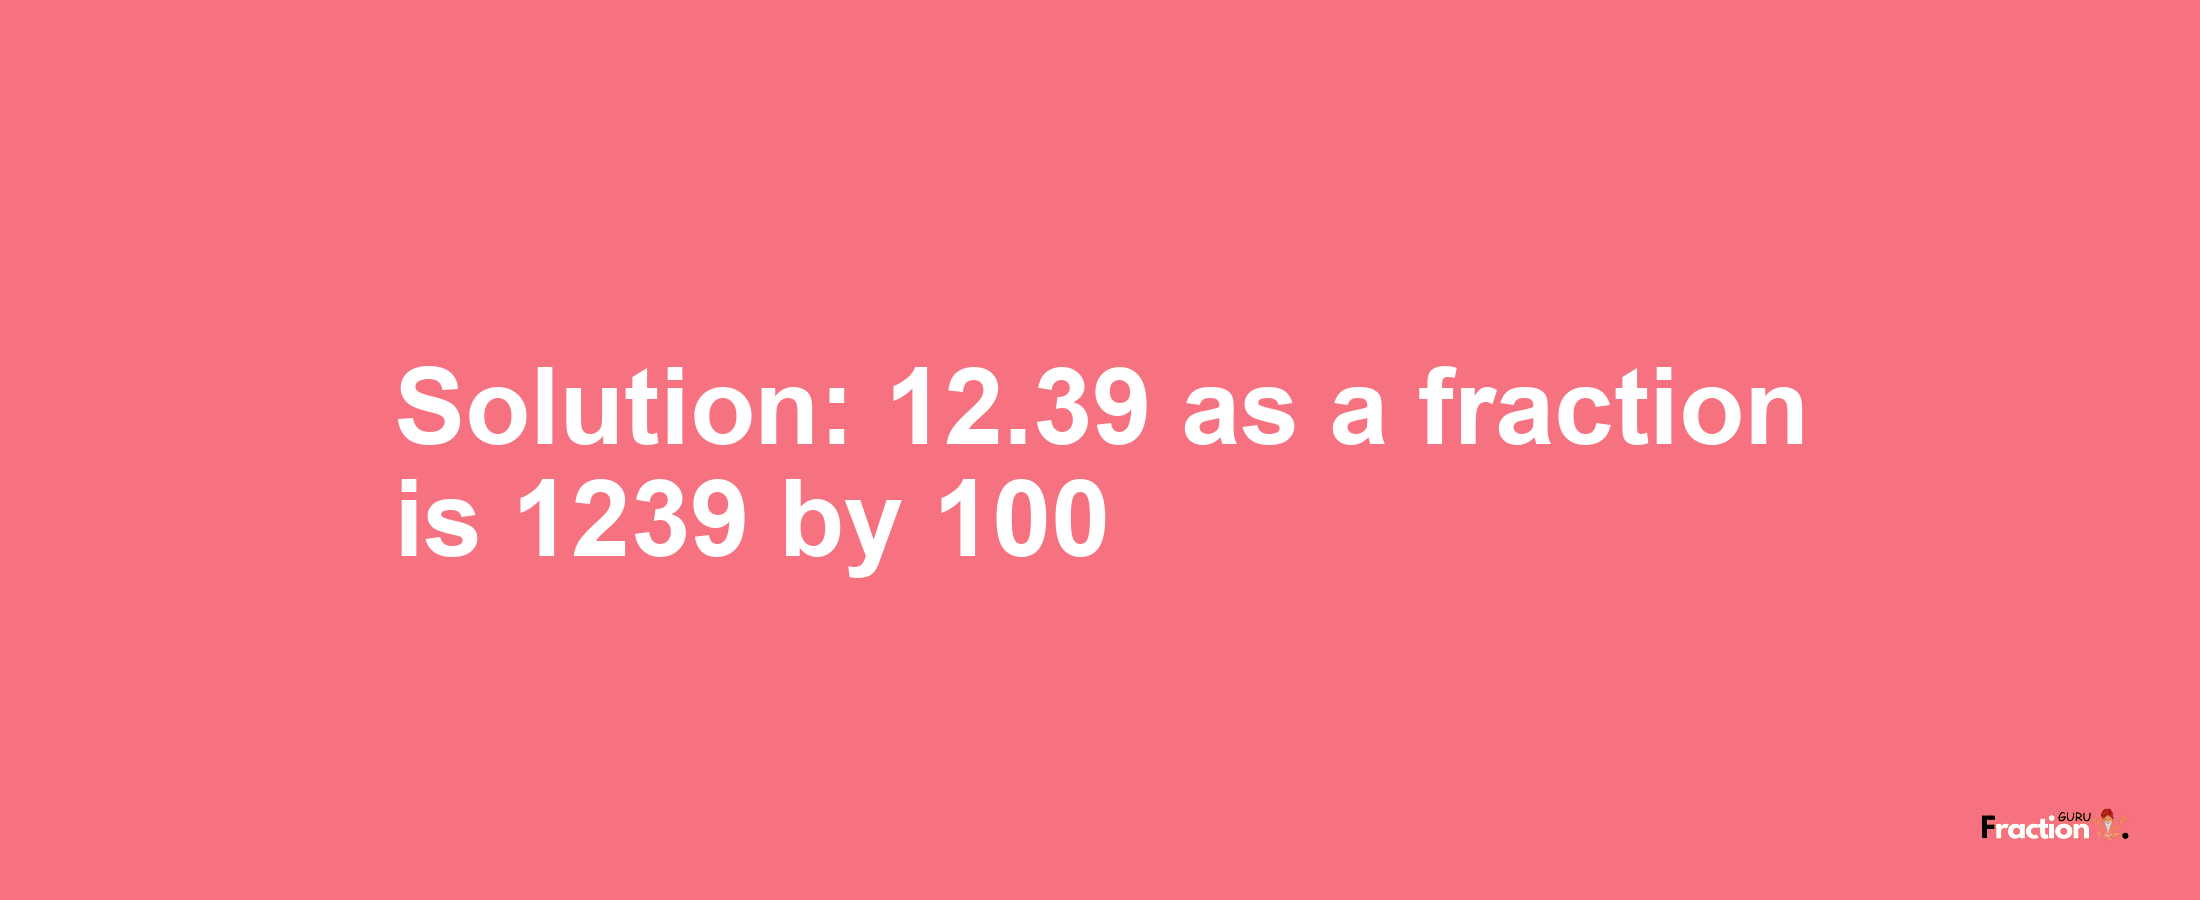 Solution:12.39 as a fraction is 1239/100